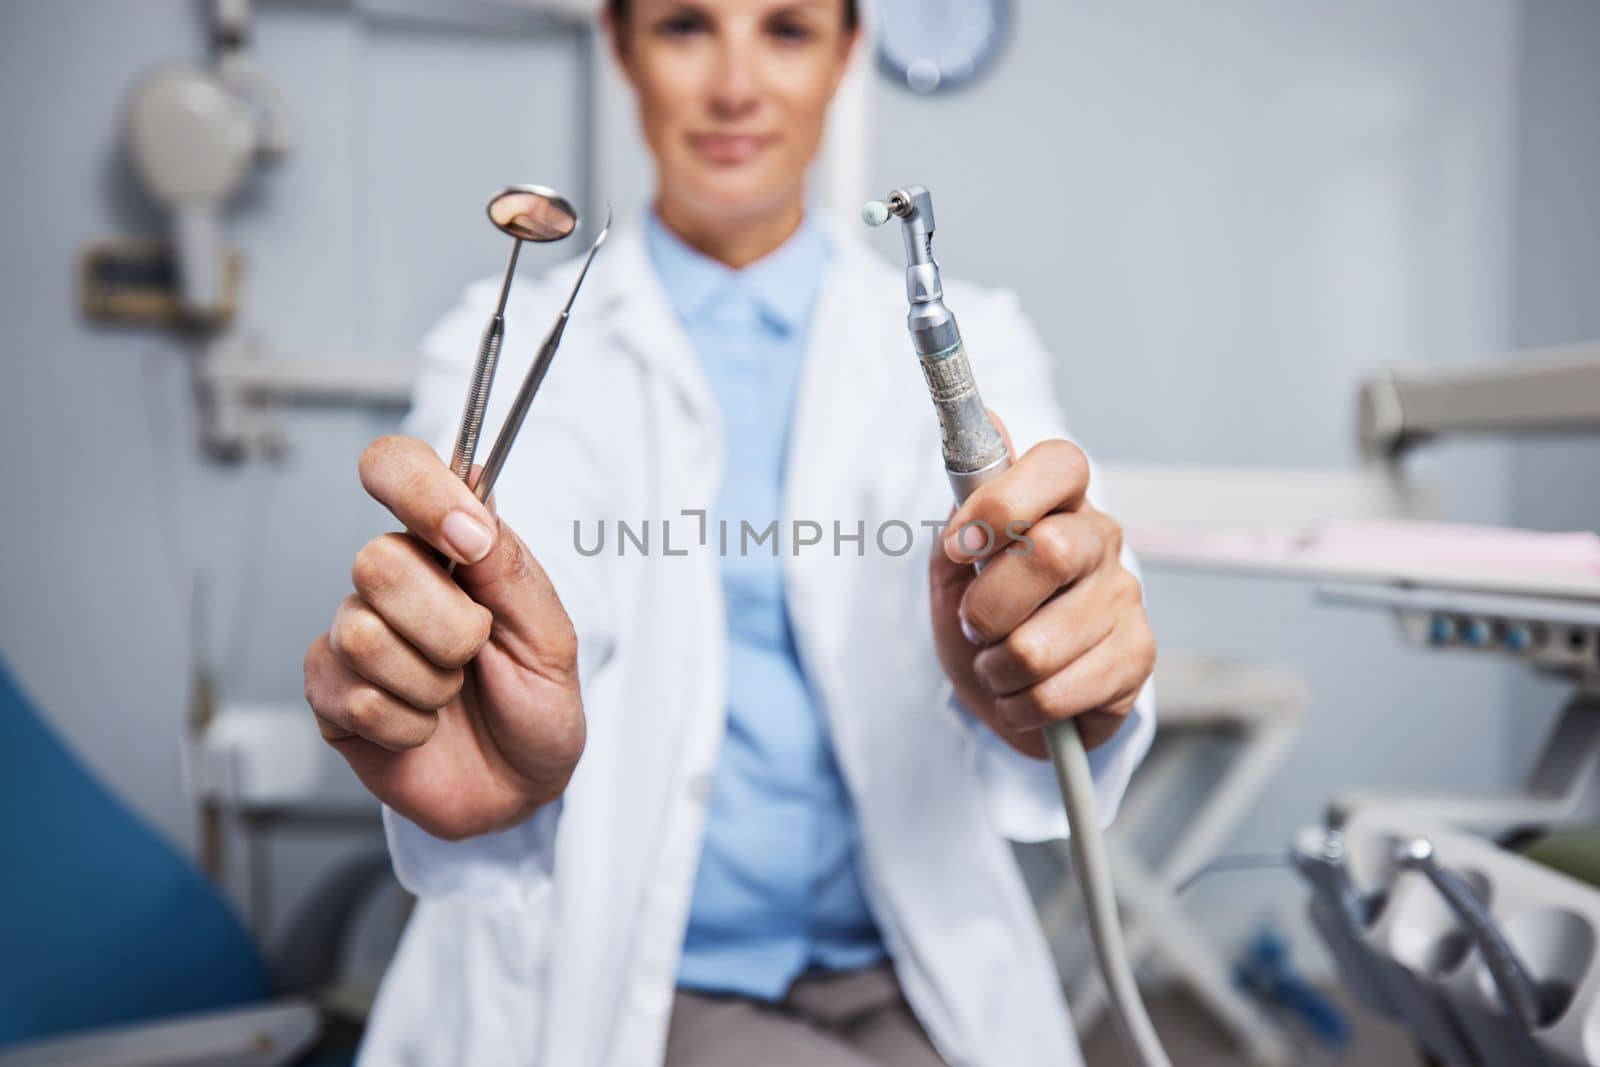 The tools to make your teeth shine. Portrait of a young woman holding teeth cleaning tools in her dentists office